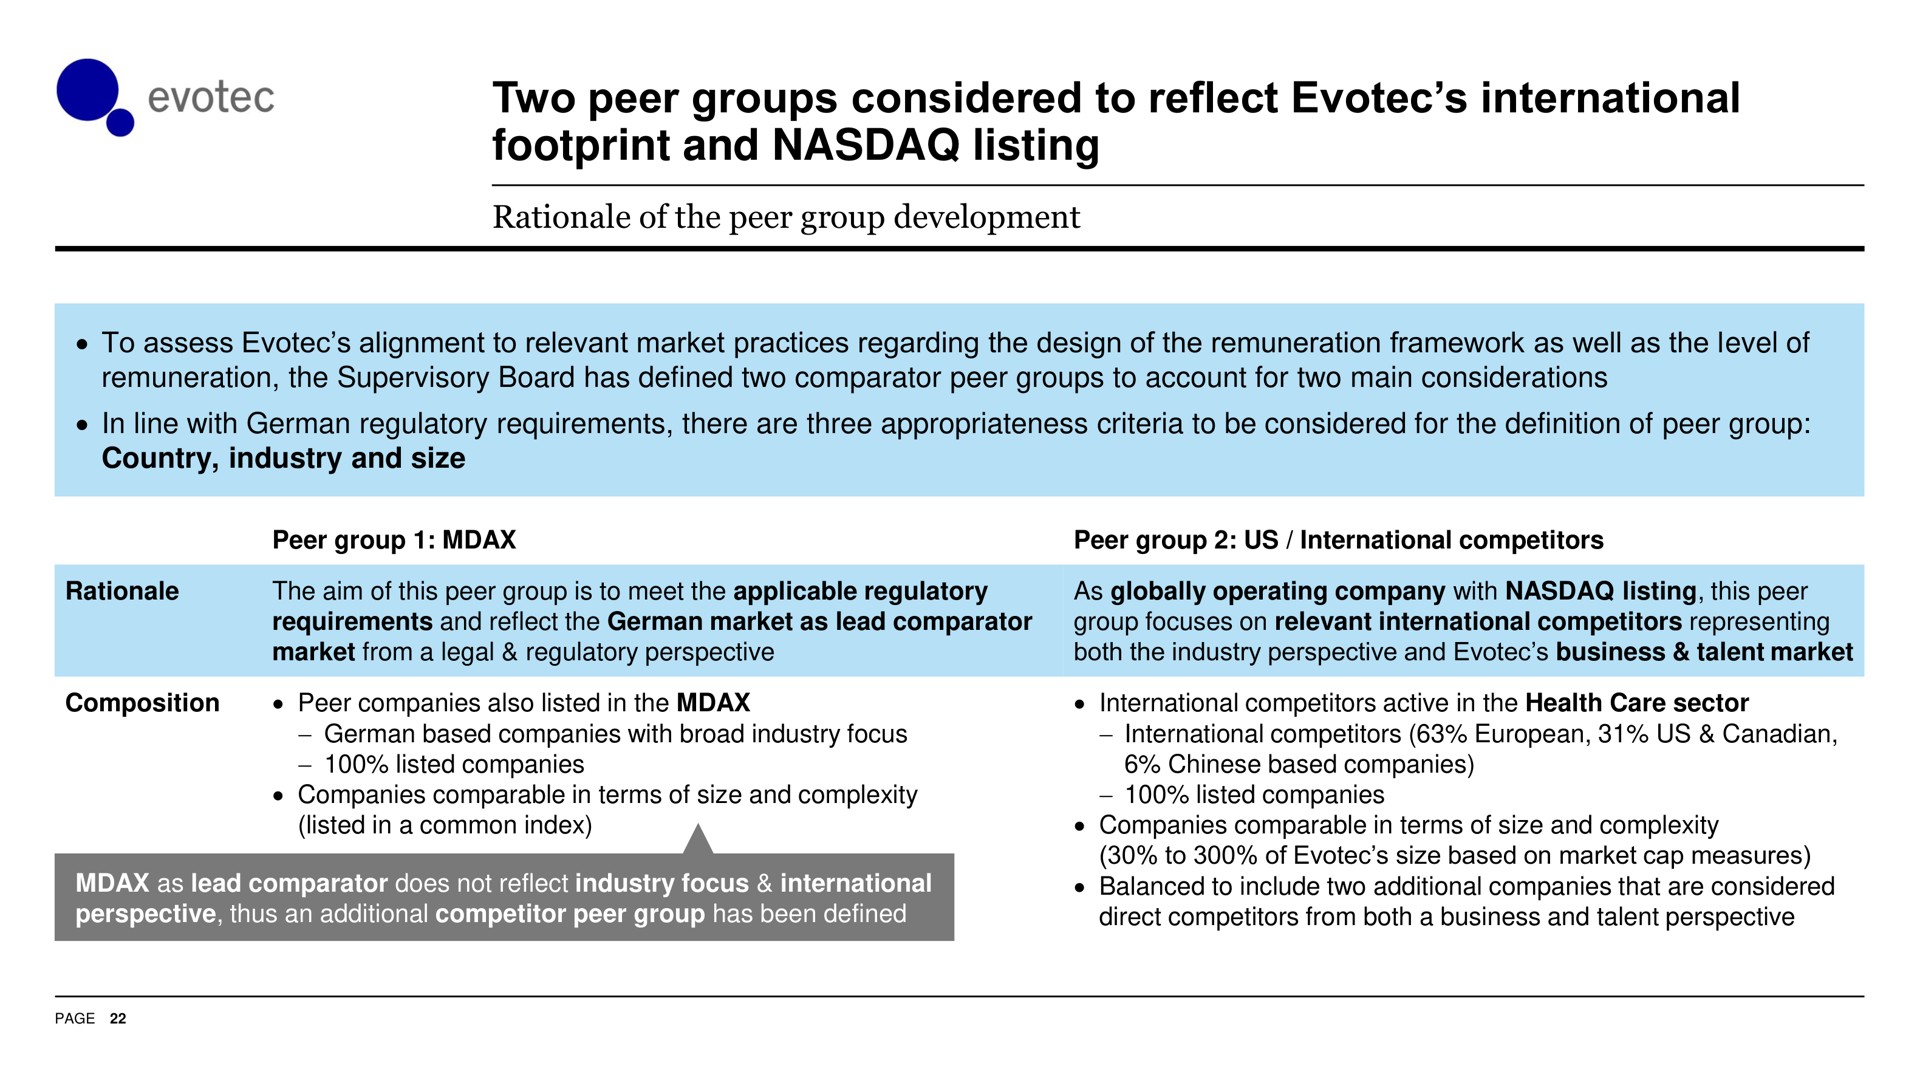 two peer groups considered to reflect international footprint and listing | Evotec